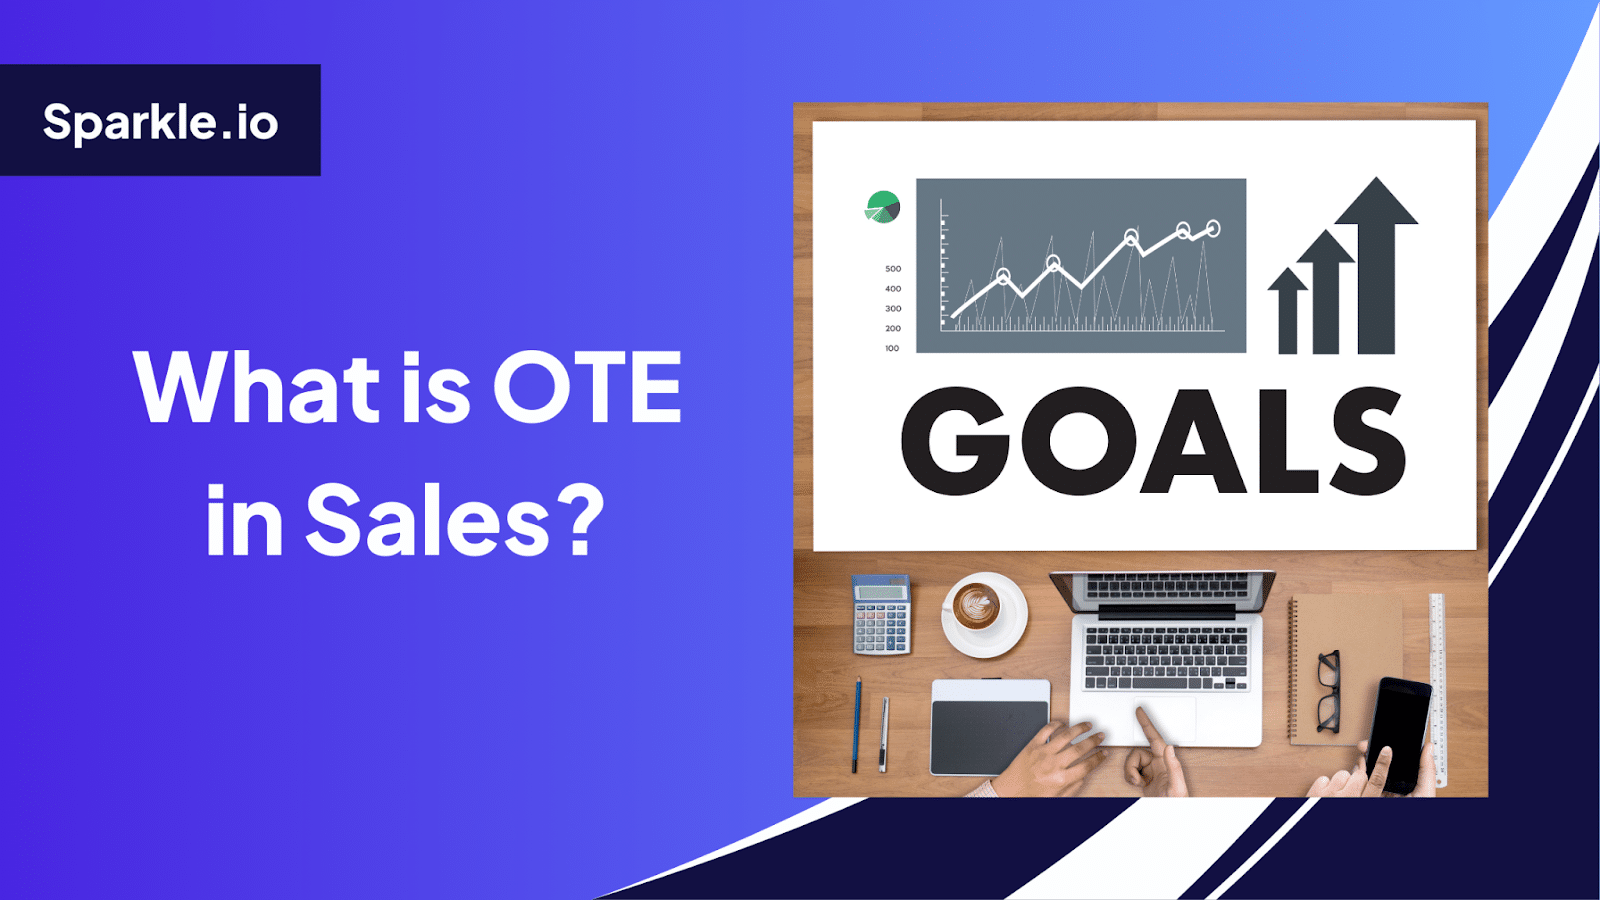 What is OTE in Sales?